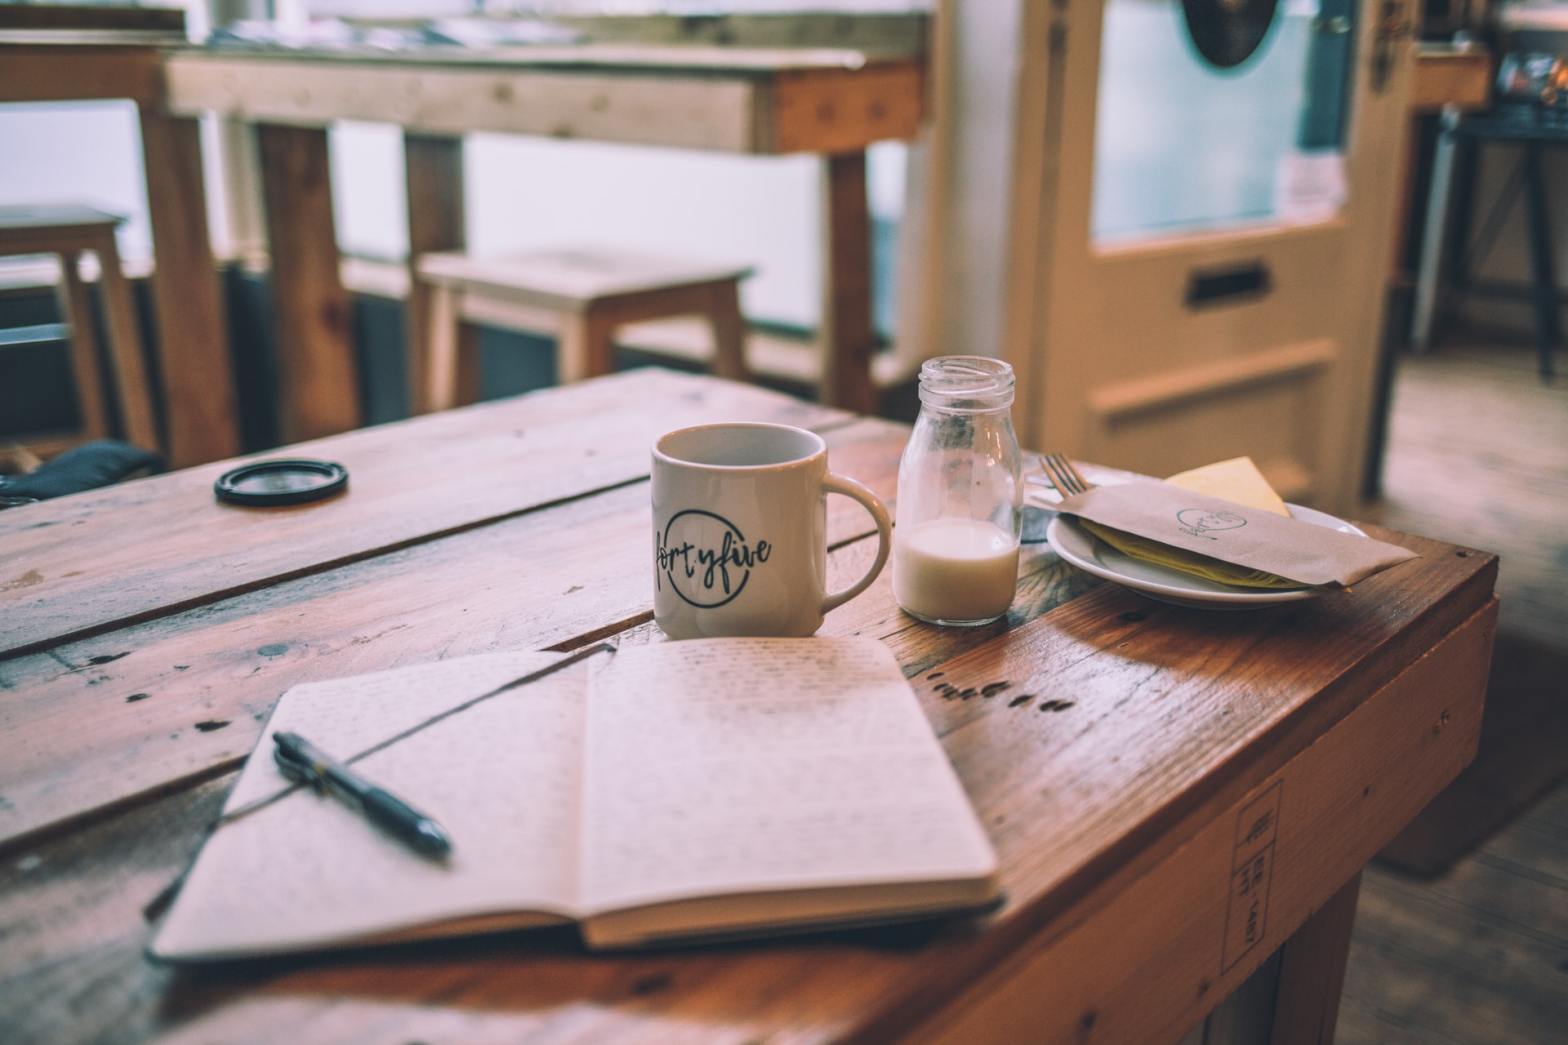 A journal, mug, bottle of milk, and plate on a table